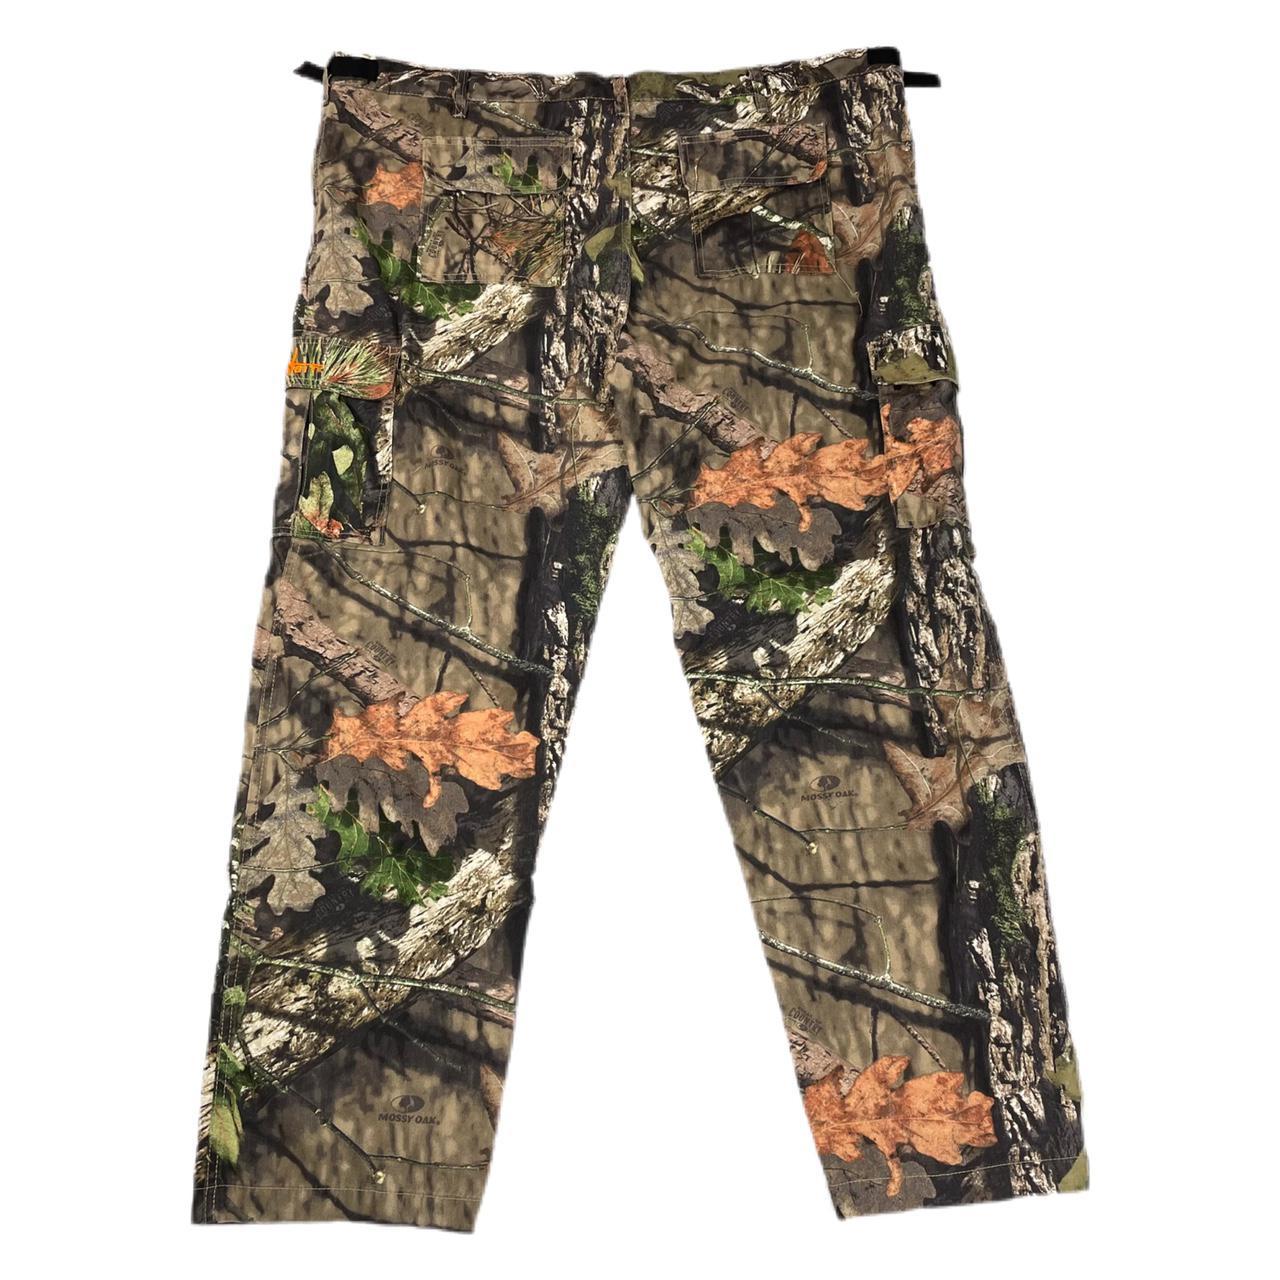 Habit realtree camouflage hunting pants • Size... - Depop